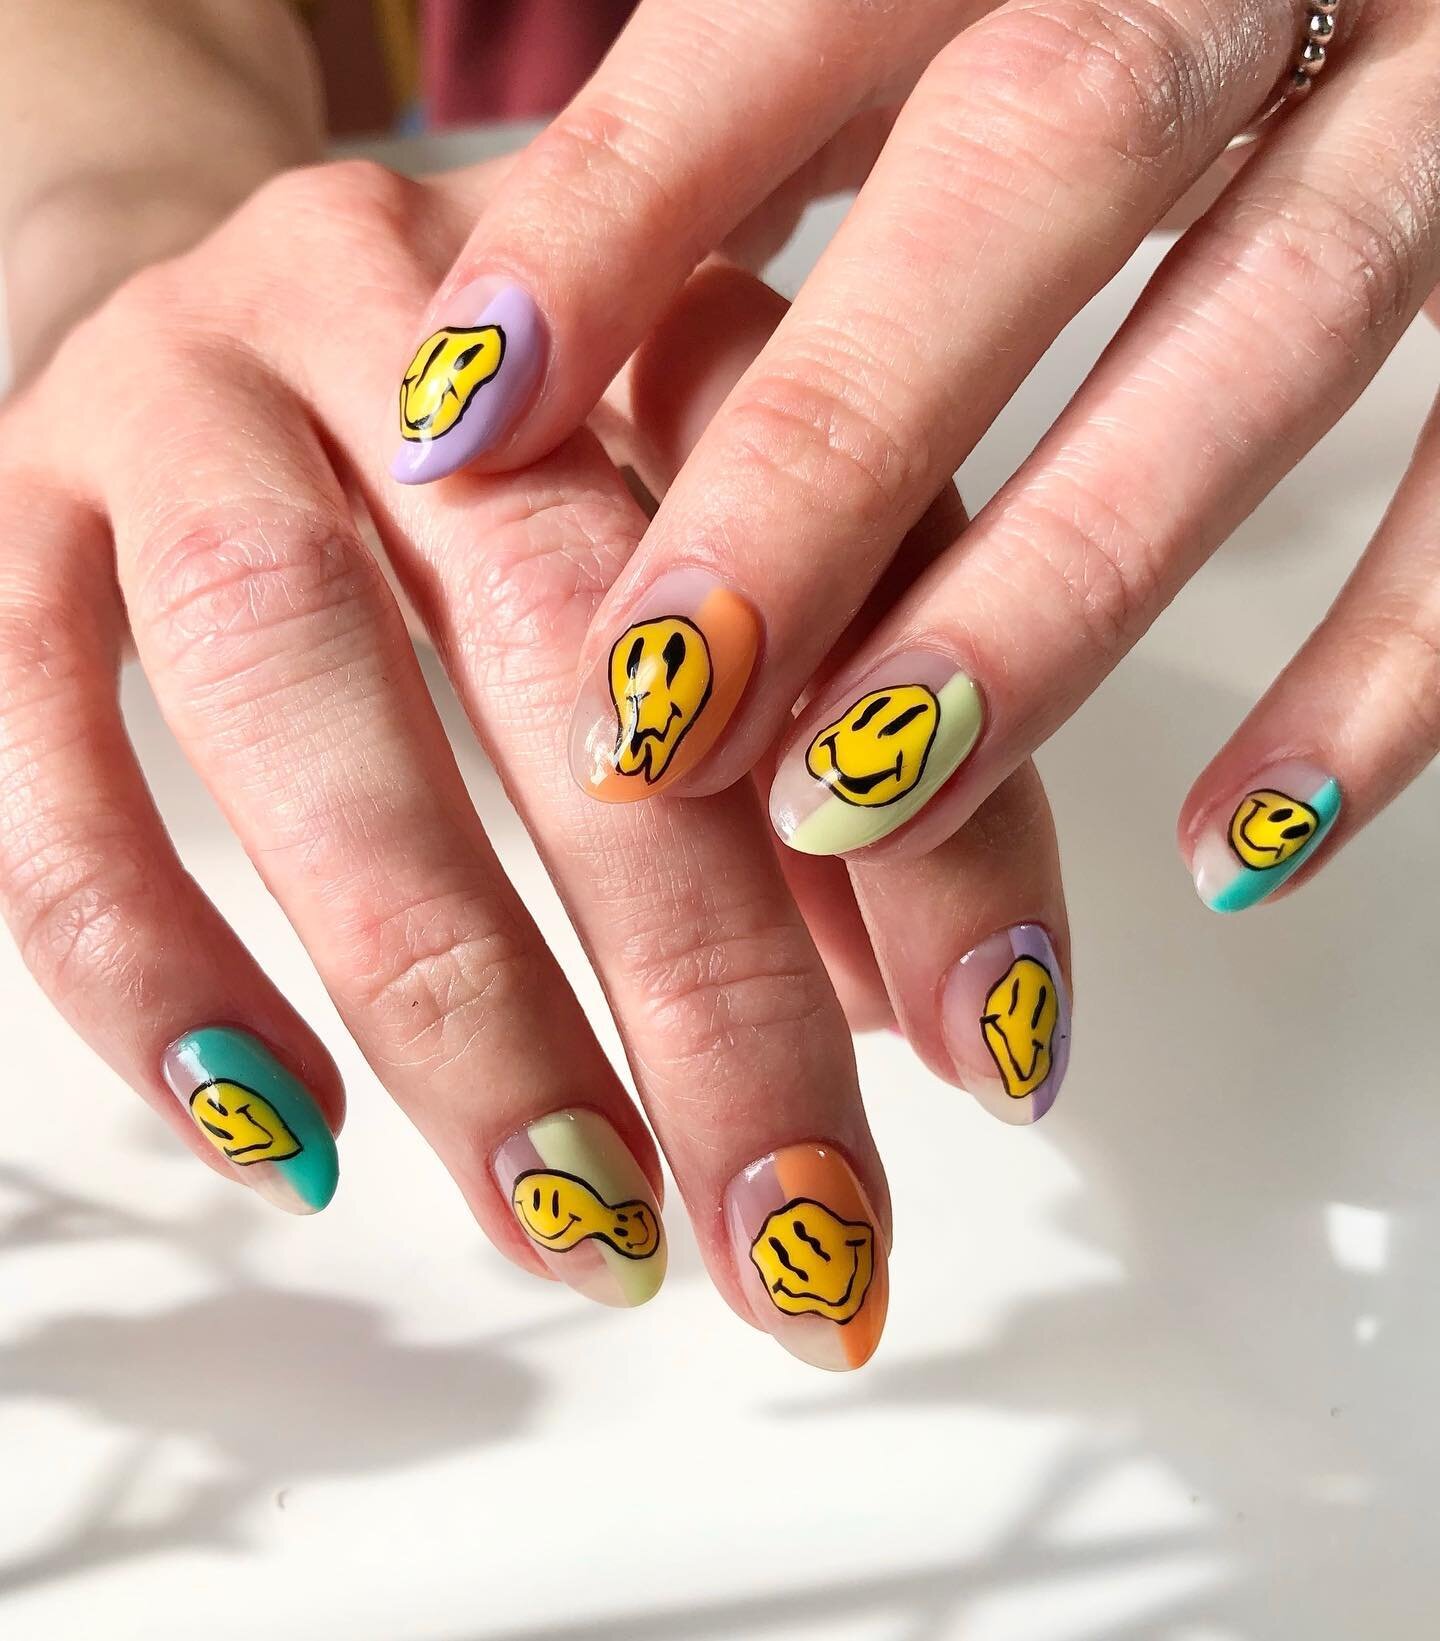 Trippy smilies 🙂🙃 I feel these are very much a vibe for this summer when keeping positive can be a challenge, hope you&rsquo;re mostly smiling even though it can get a bit hard some days 💛
Painted all with @biosculpturegelgb 
Prepped with @officia